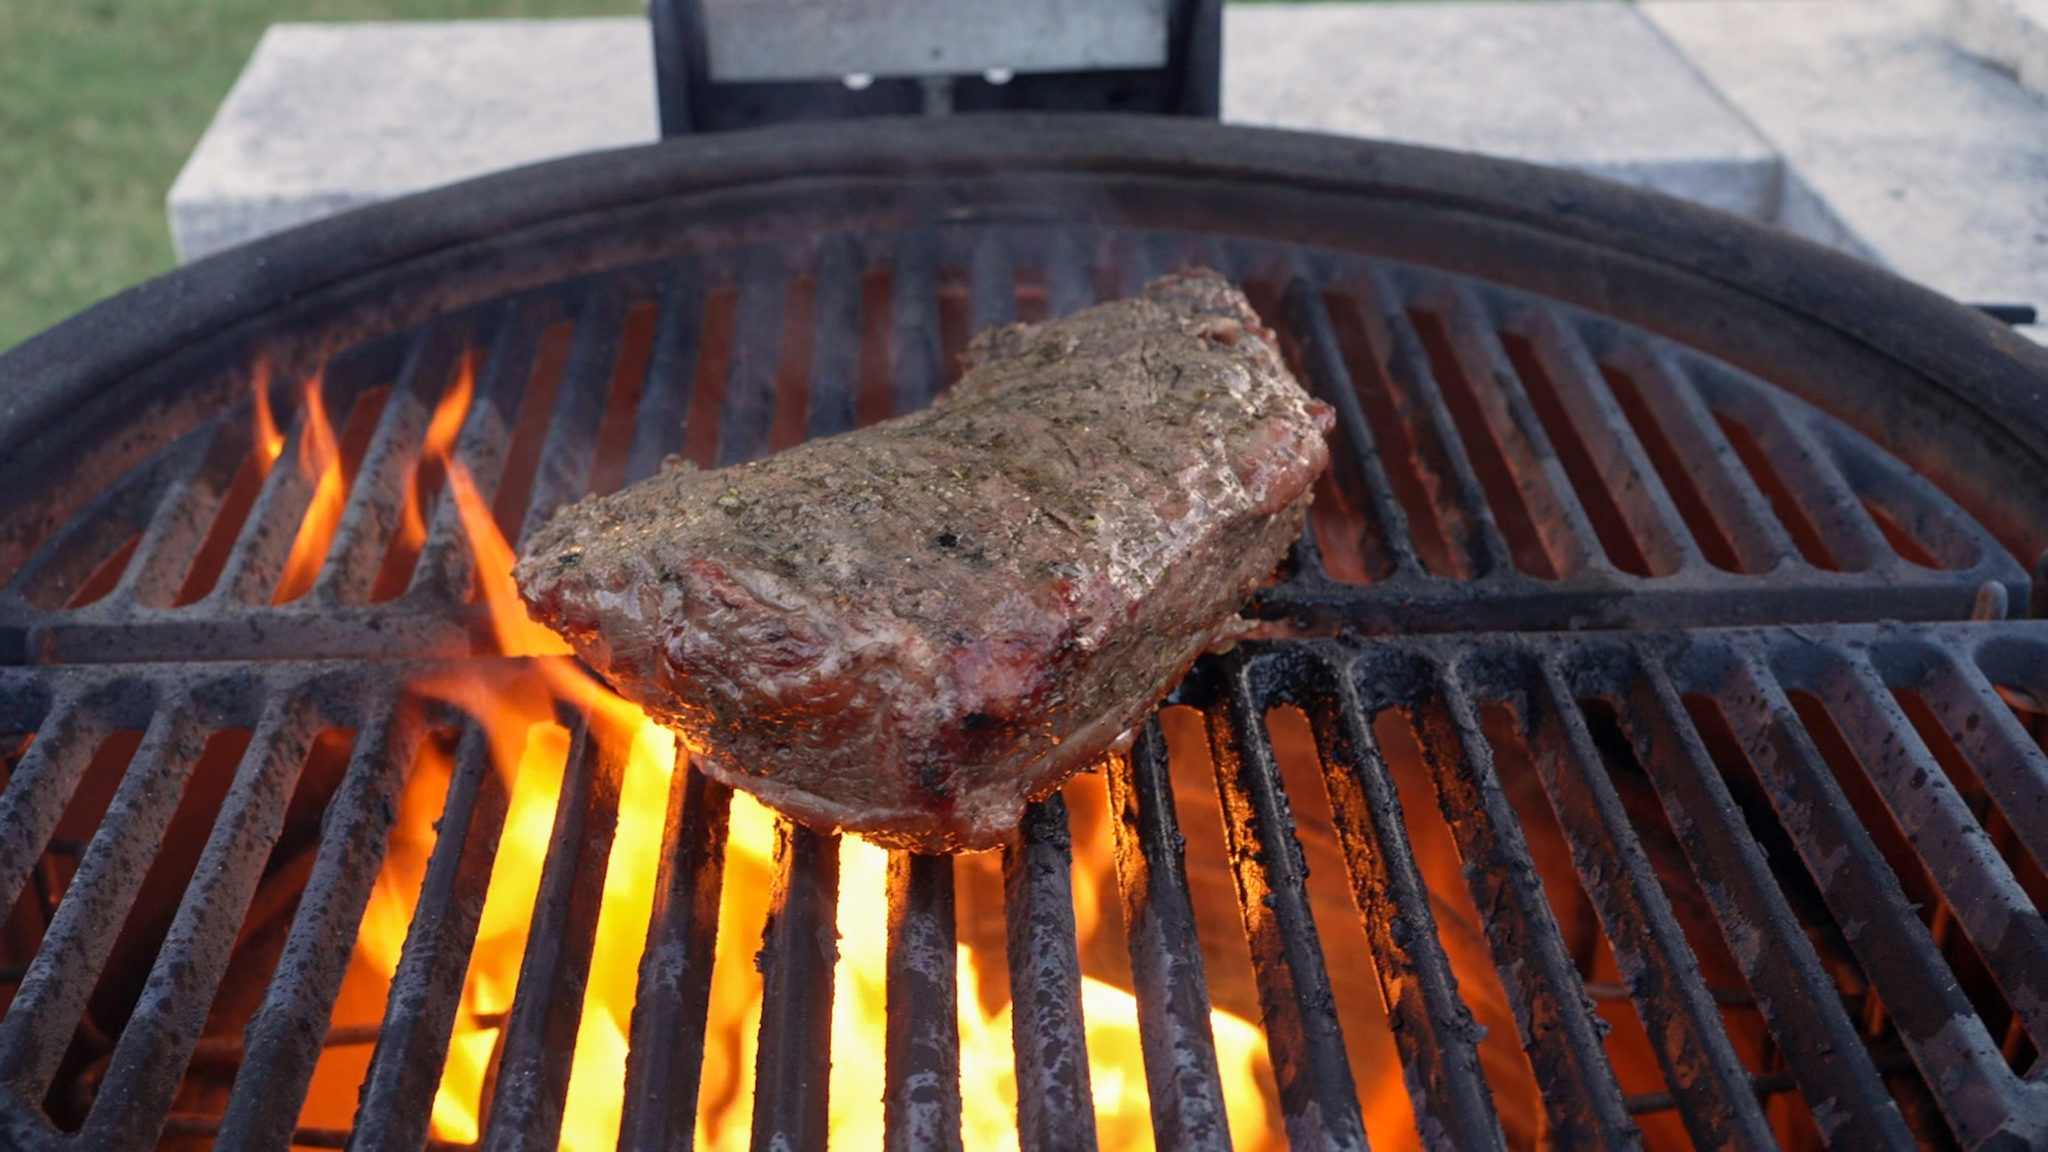 Sear the Smoked Tri-Tip Over a Hot fire